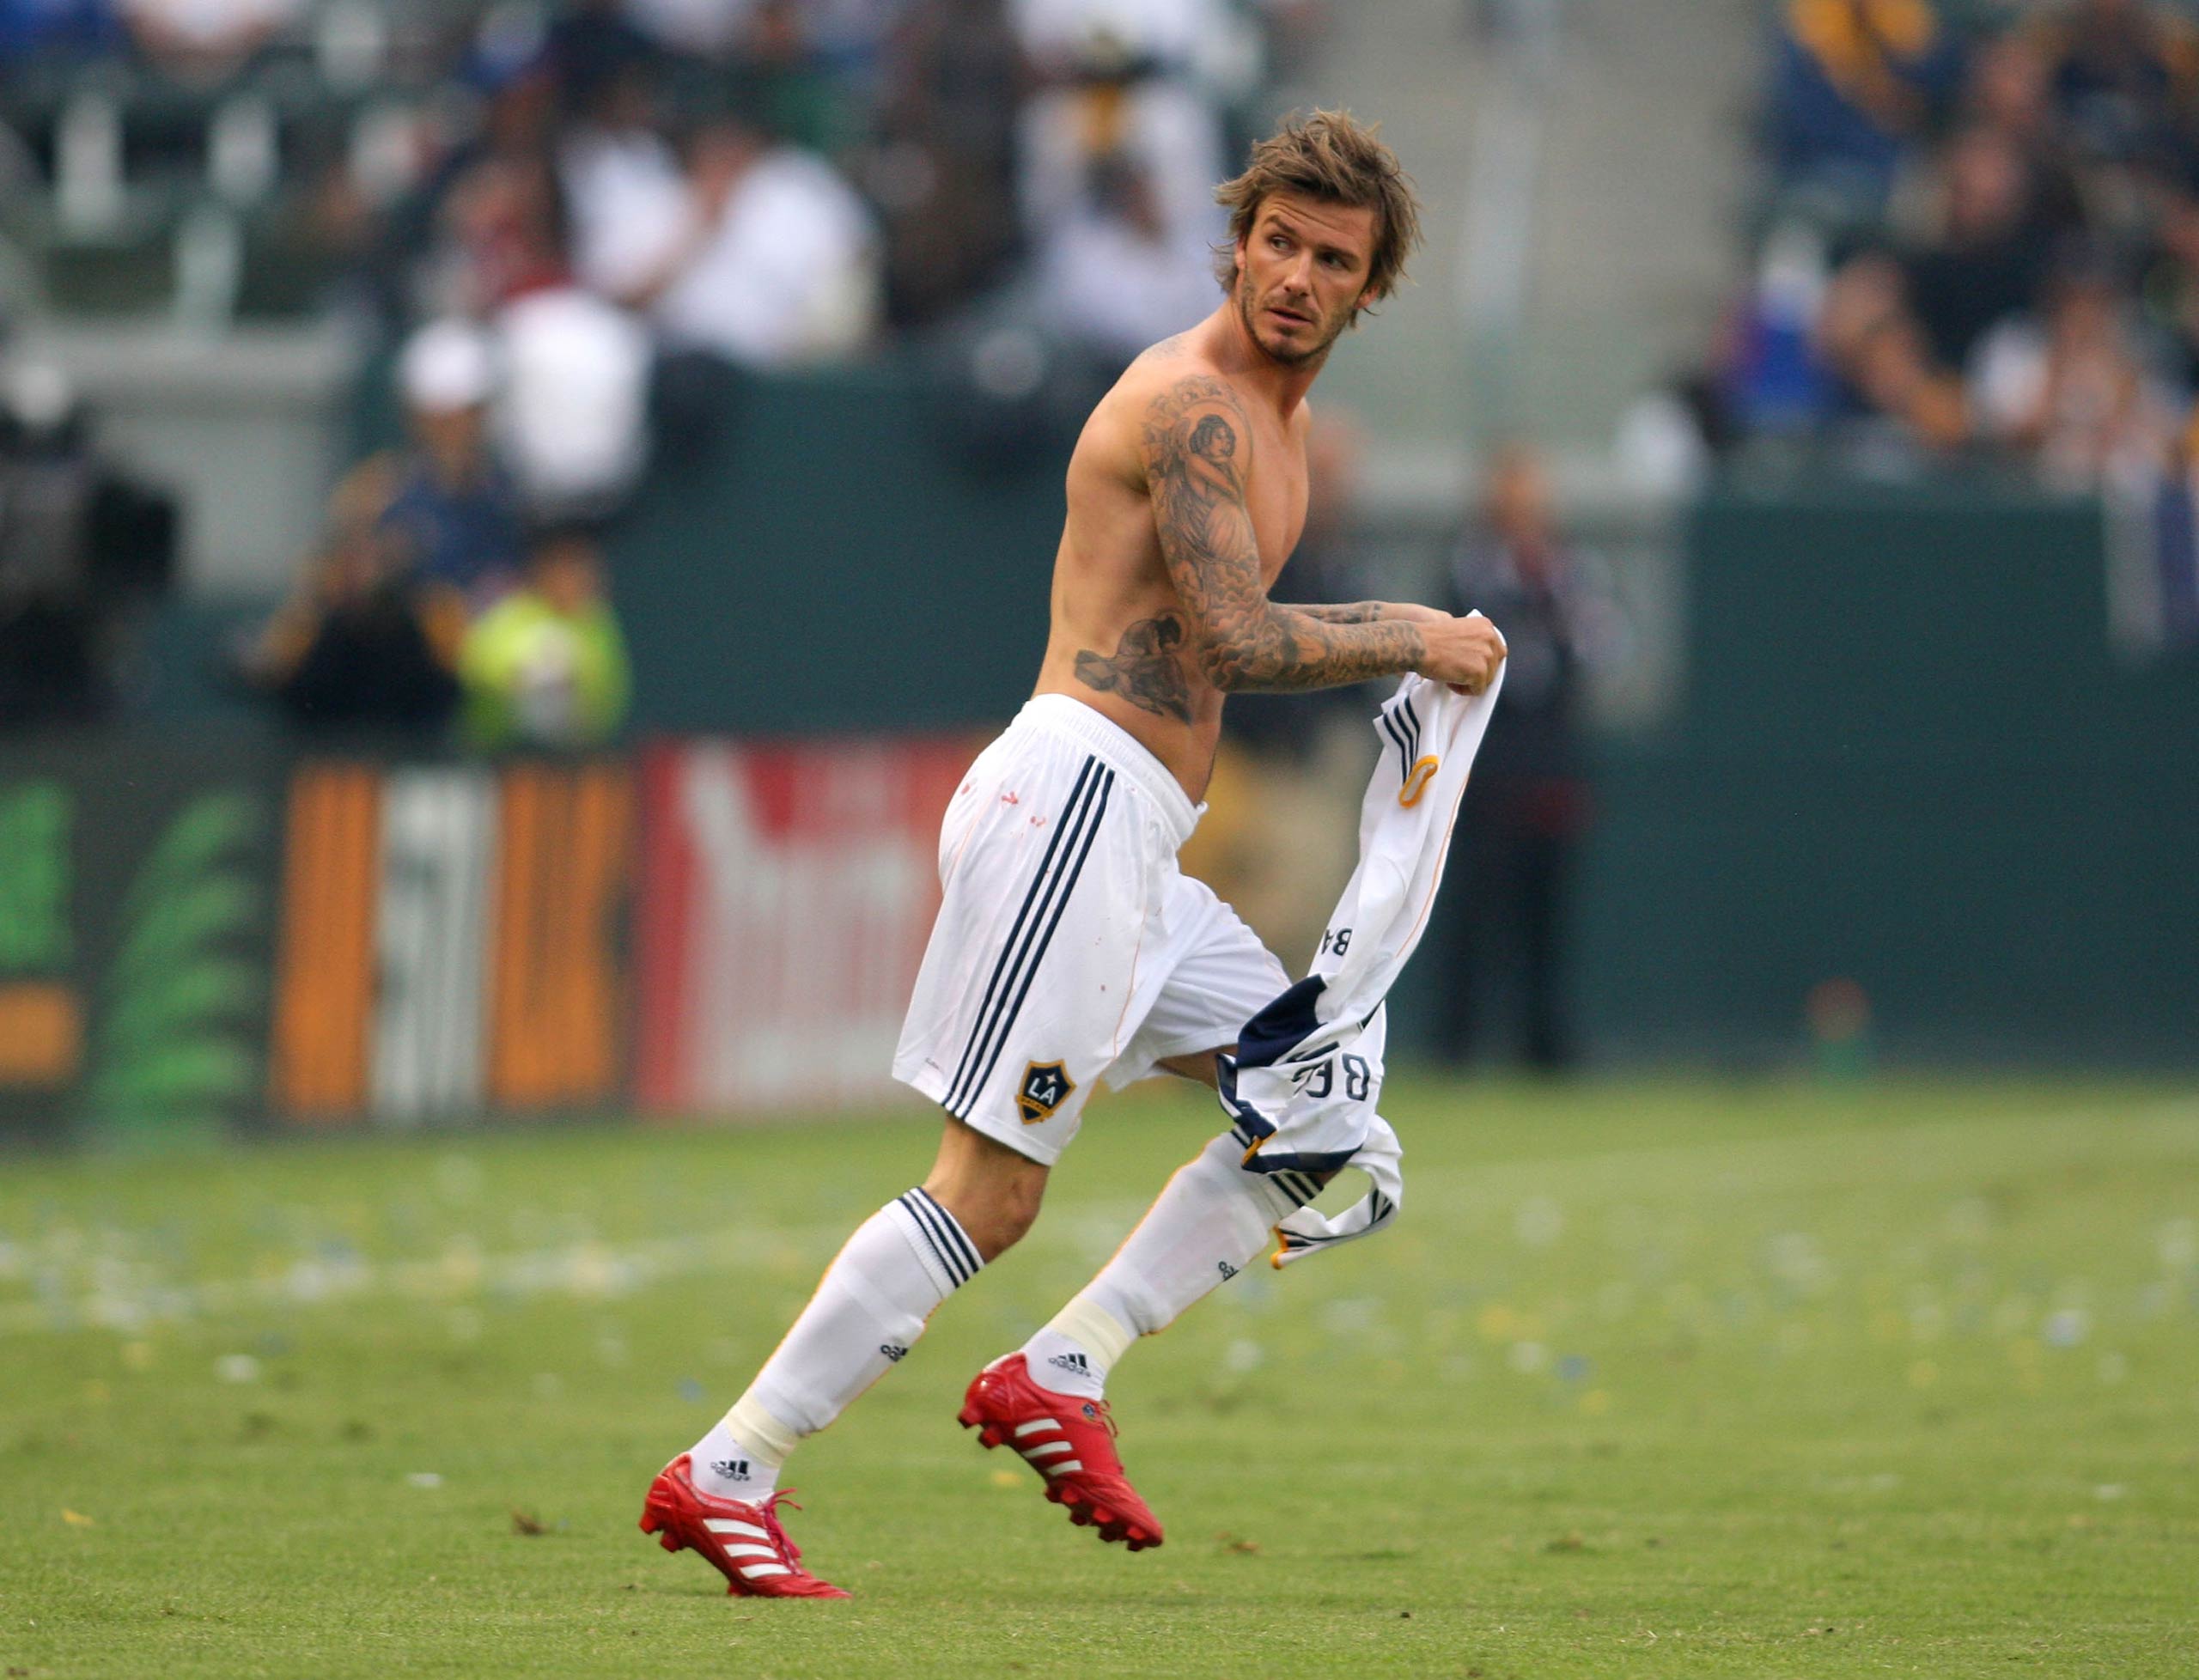 David Beckham of the Los Angeles Galaxy during a match against FC Dallas in Carson, Calif. in 2010.